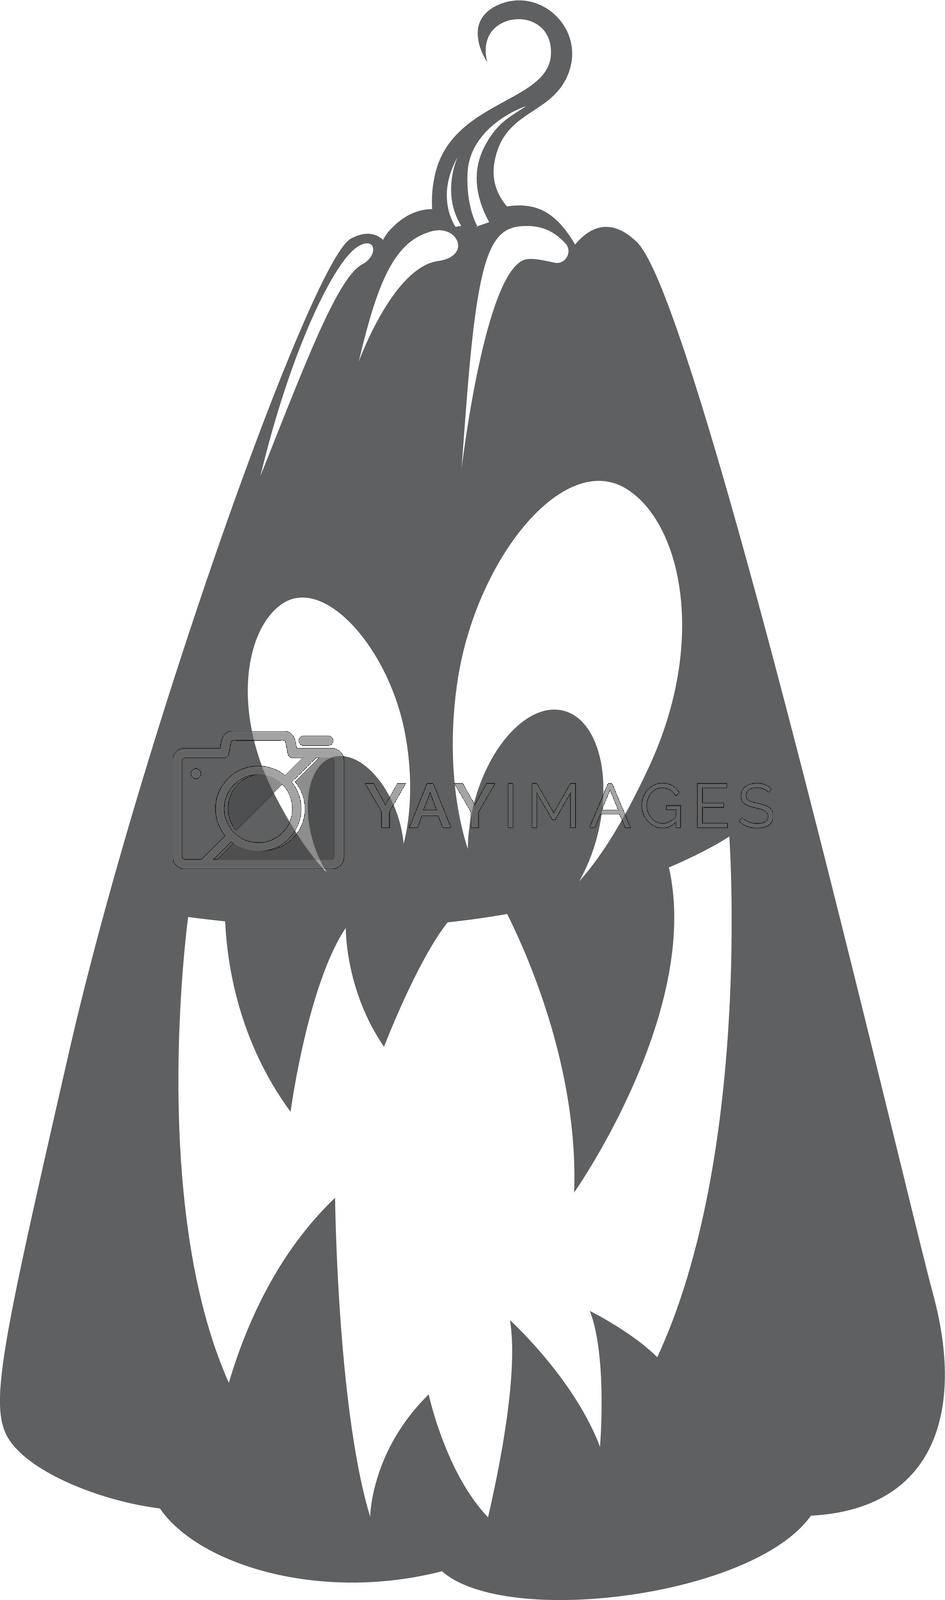 Royalty free image of Crazy pumpkin icon. Black silhouette with carved teeth by LadadikArt